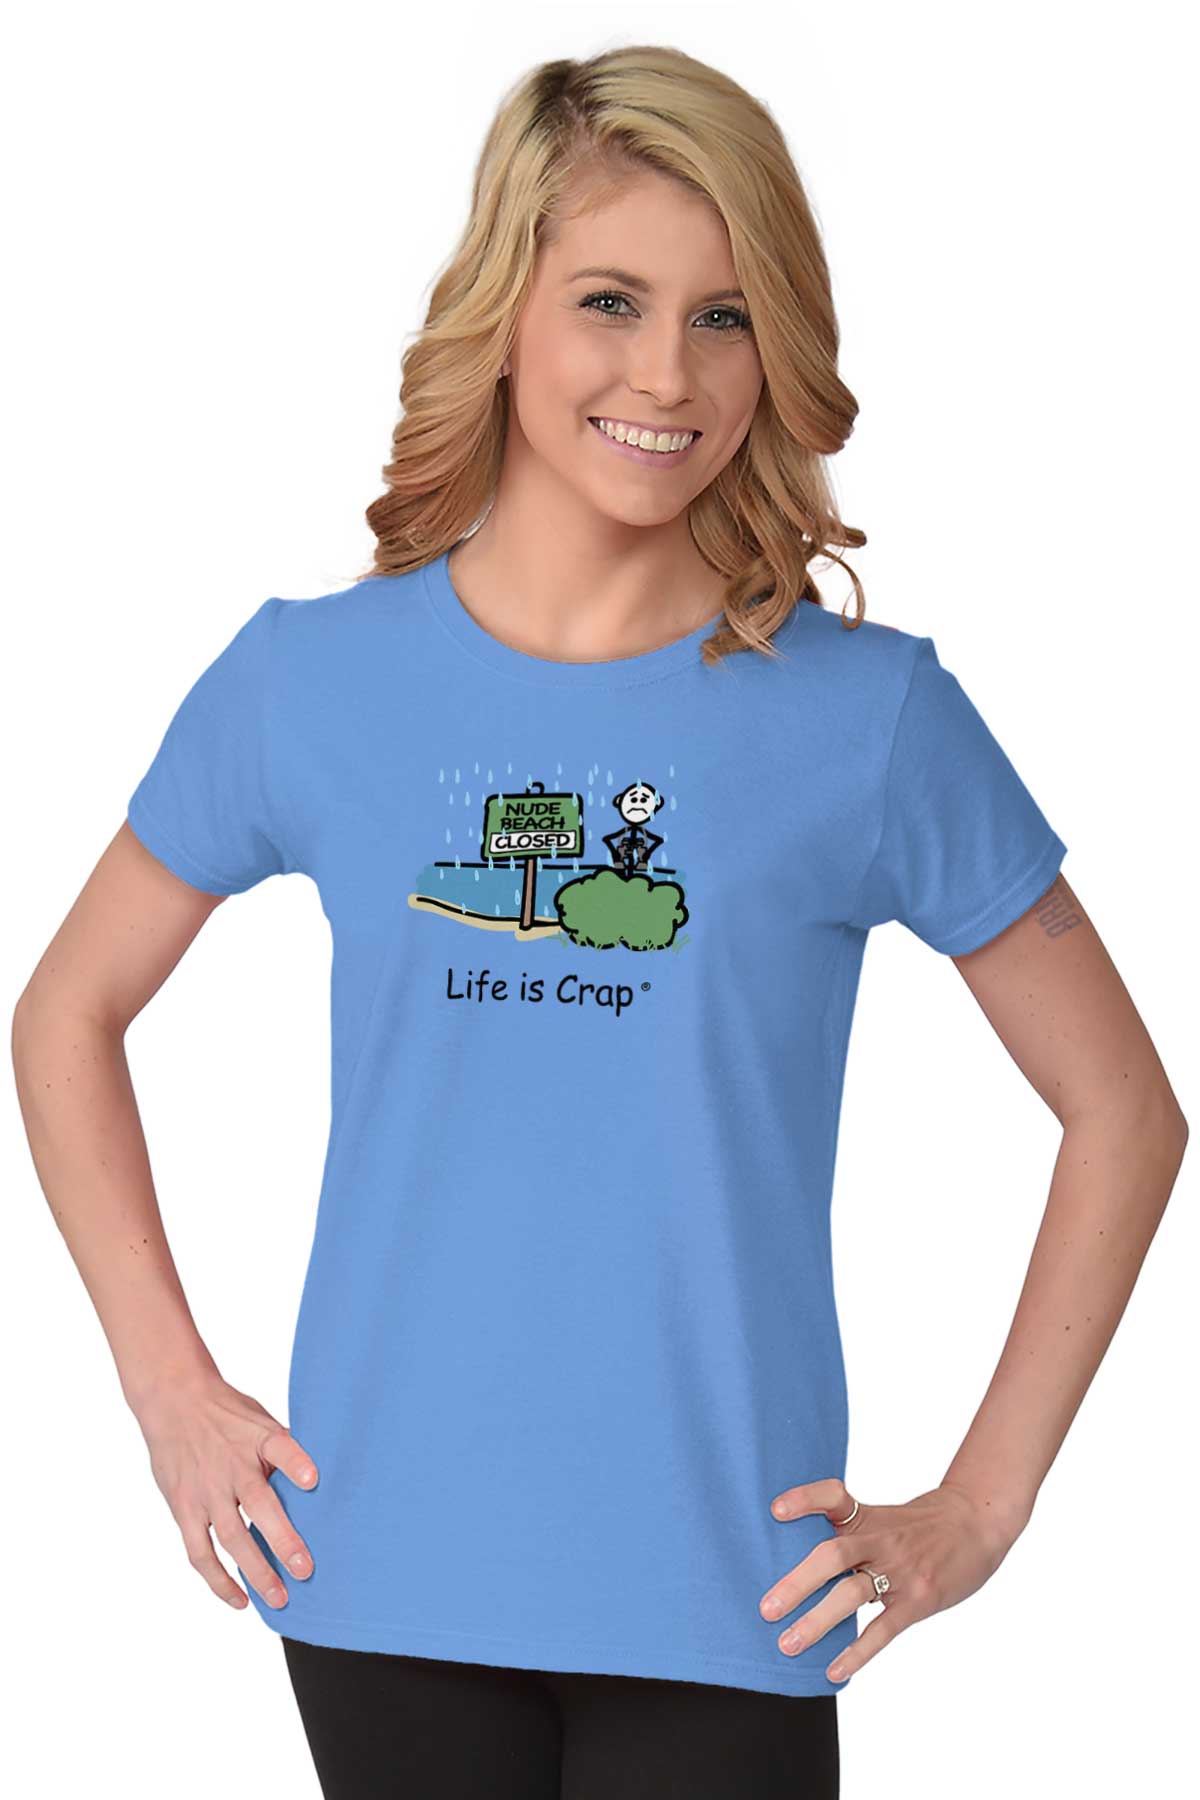 Life is Crap Nude Beach Funny Gift Idea Womens Short Sleeve Ladies T ...